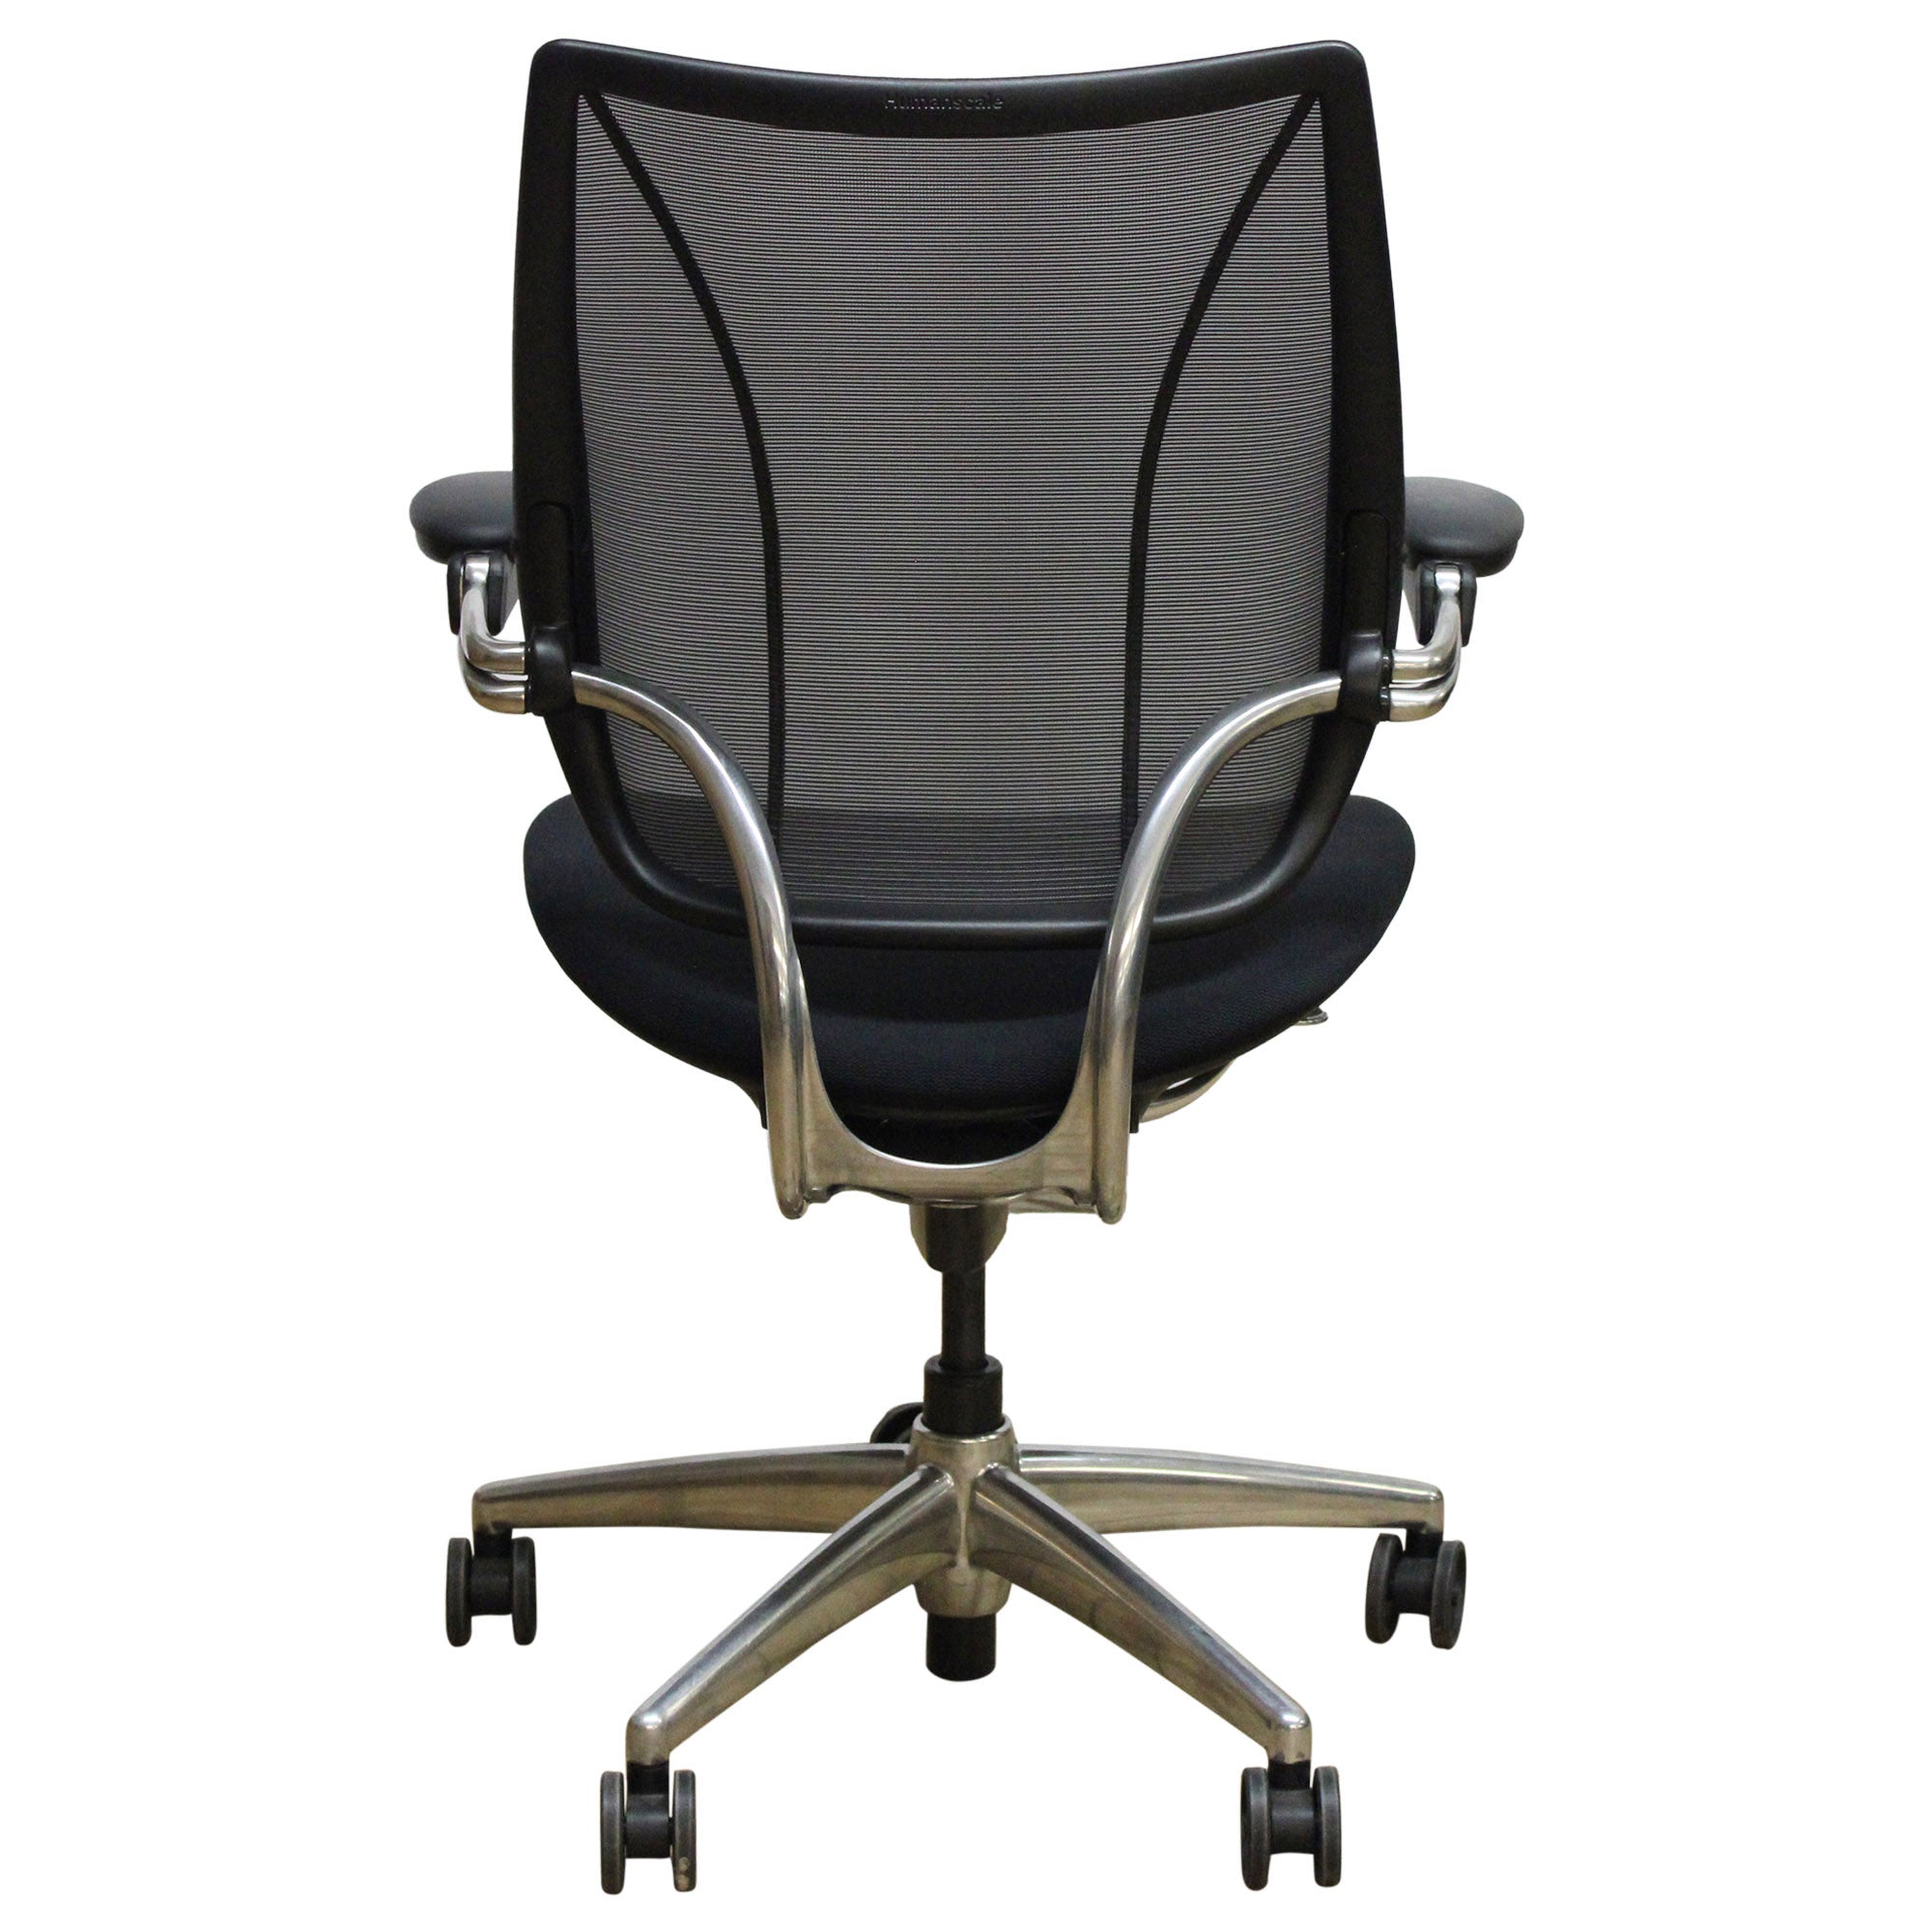 Humanscale Liberty Task Chair, Chrome Base - Preowned